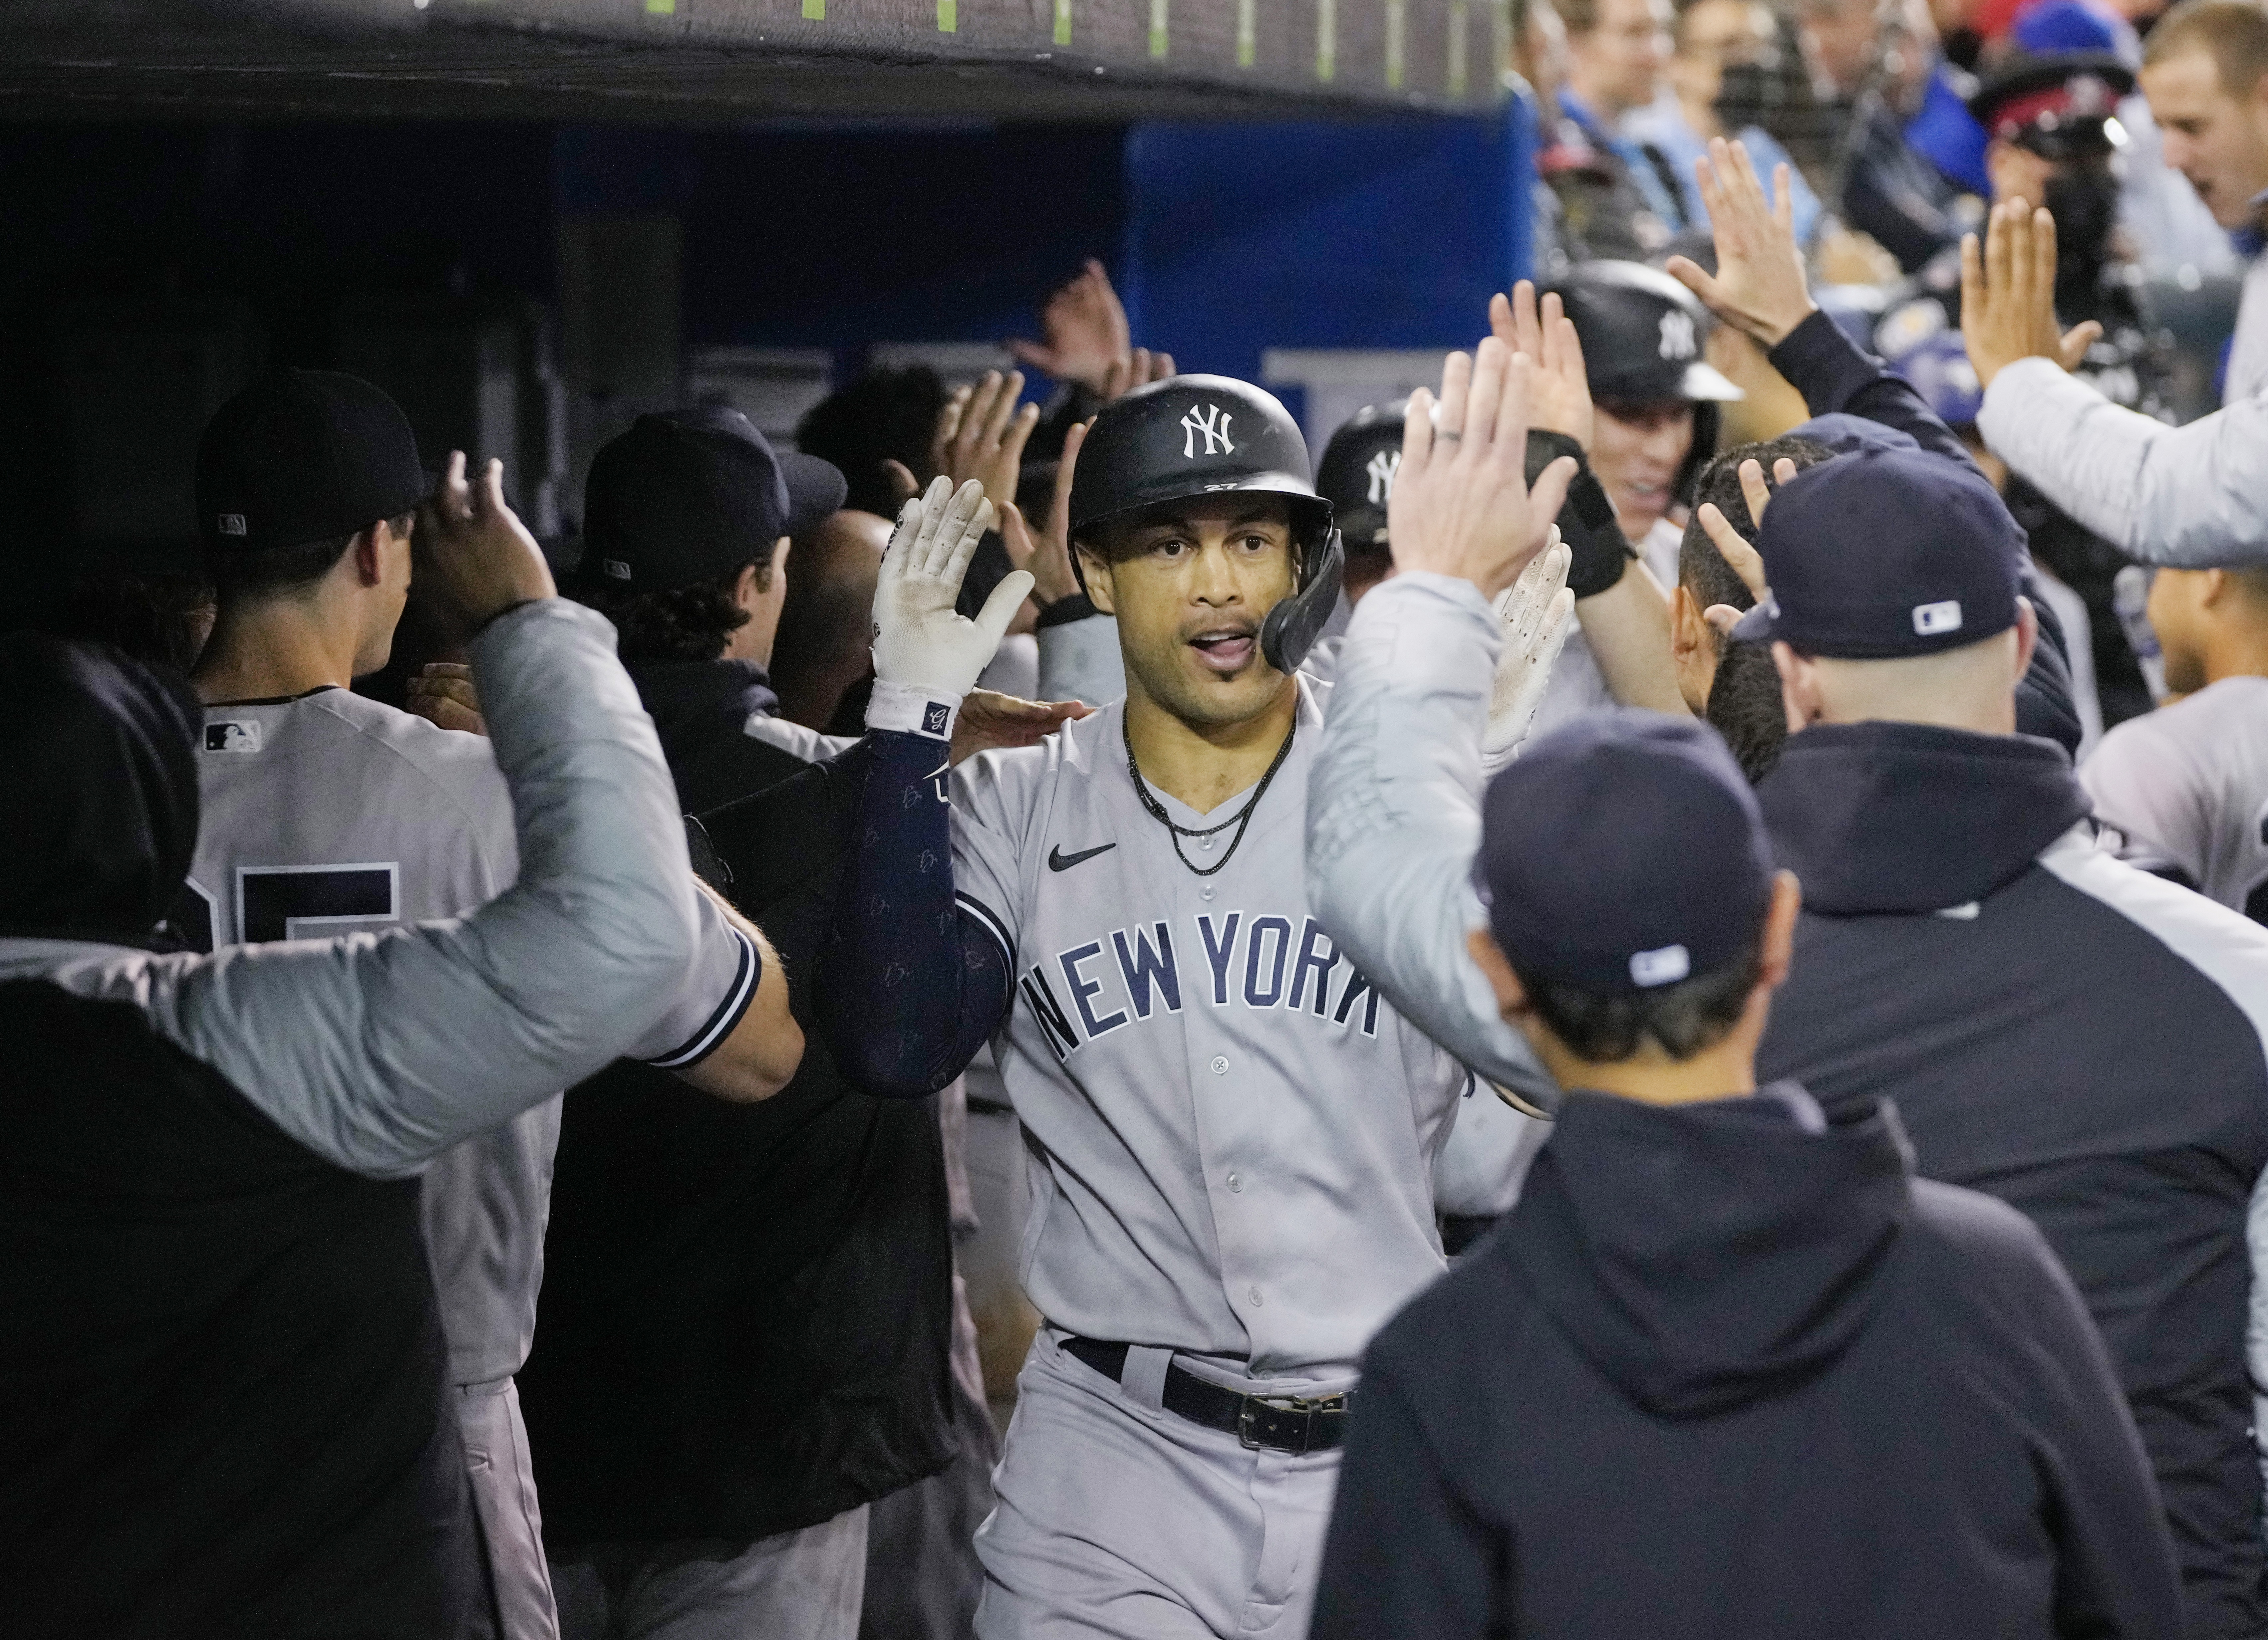 Blue Jays fans should relish chance to hate Yankees, but leave the